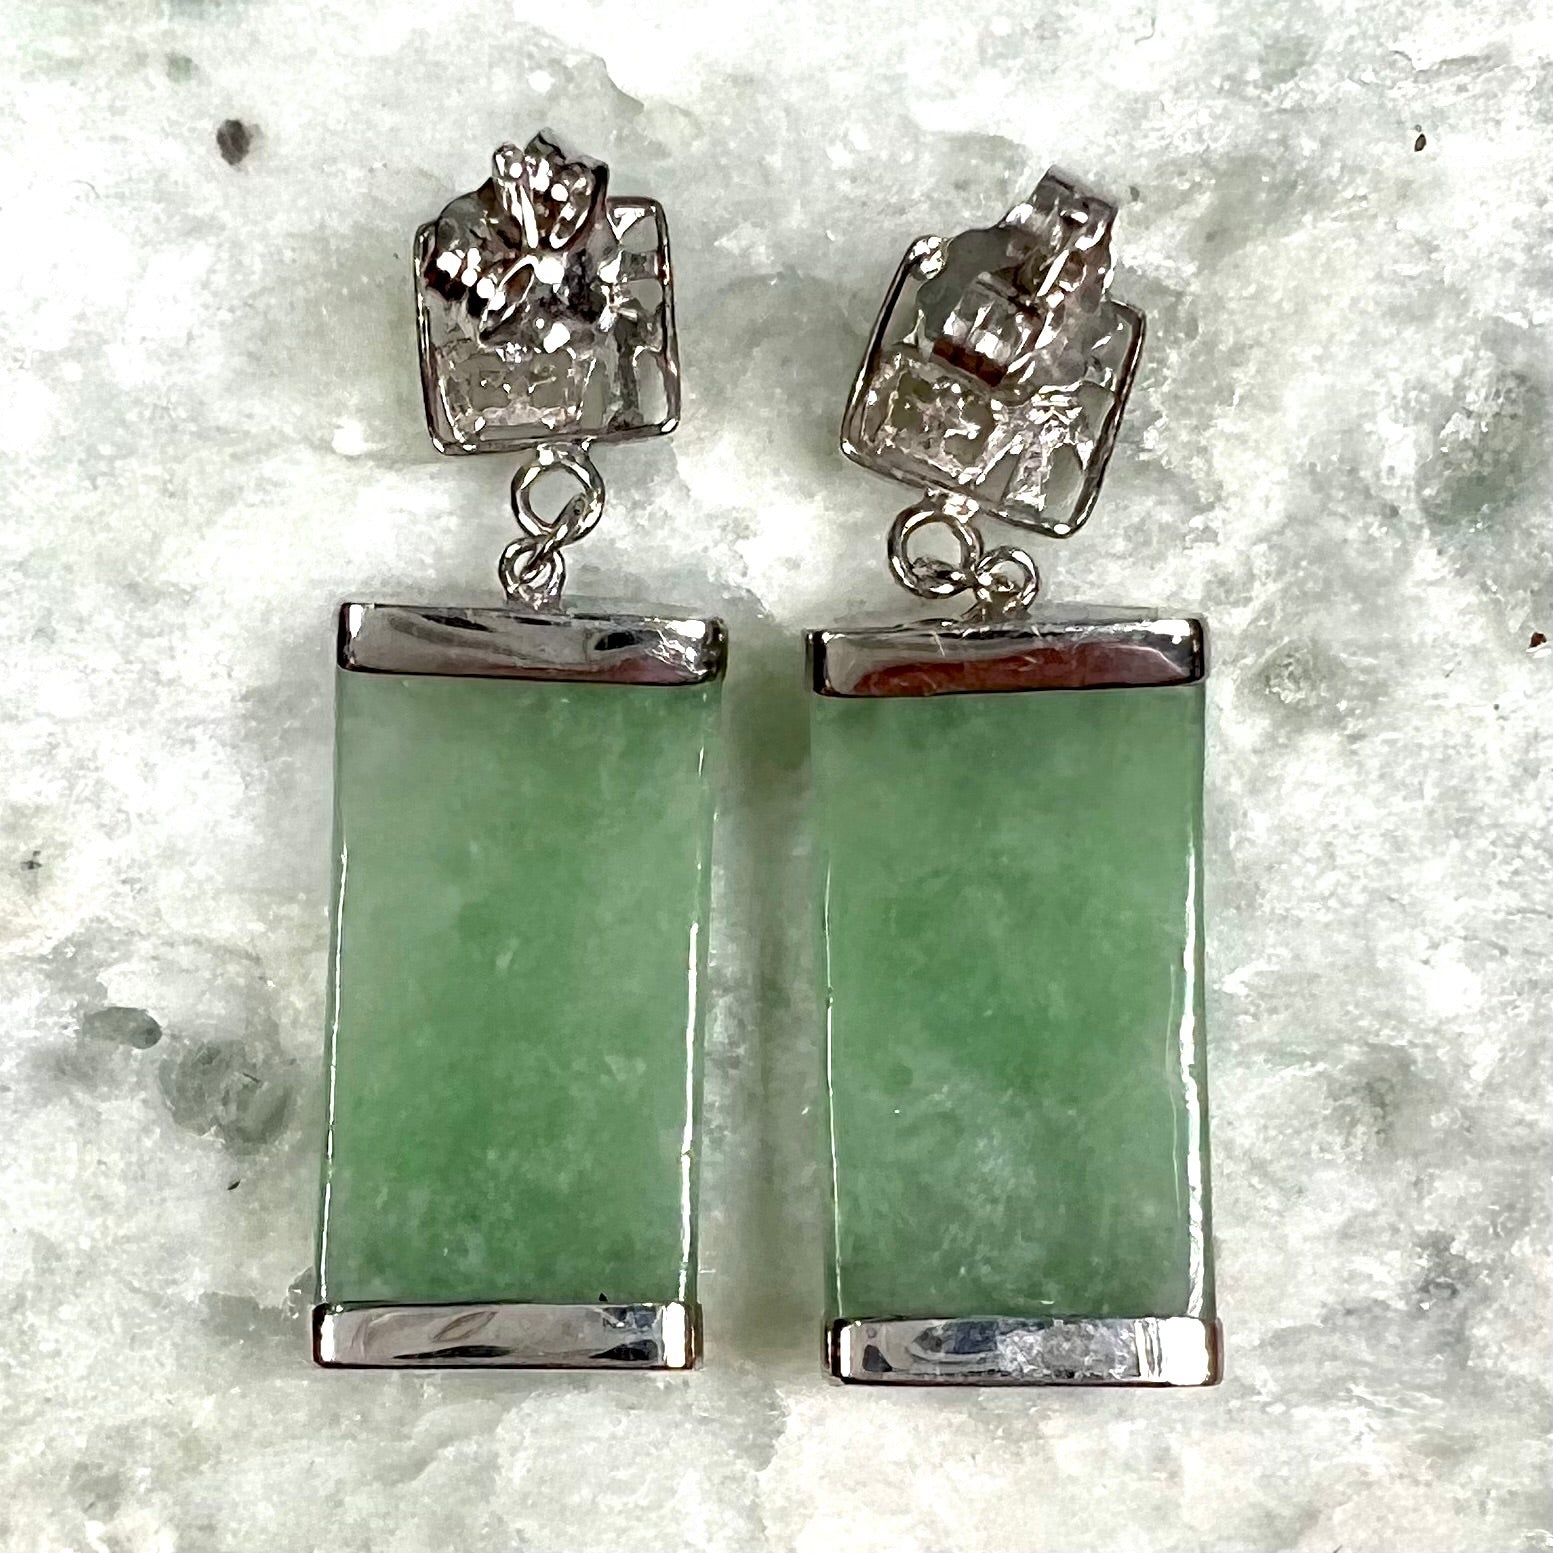 A pair of white gold jadeite dangle earrings with Chinese characters.